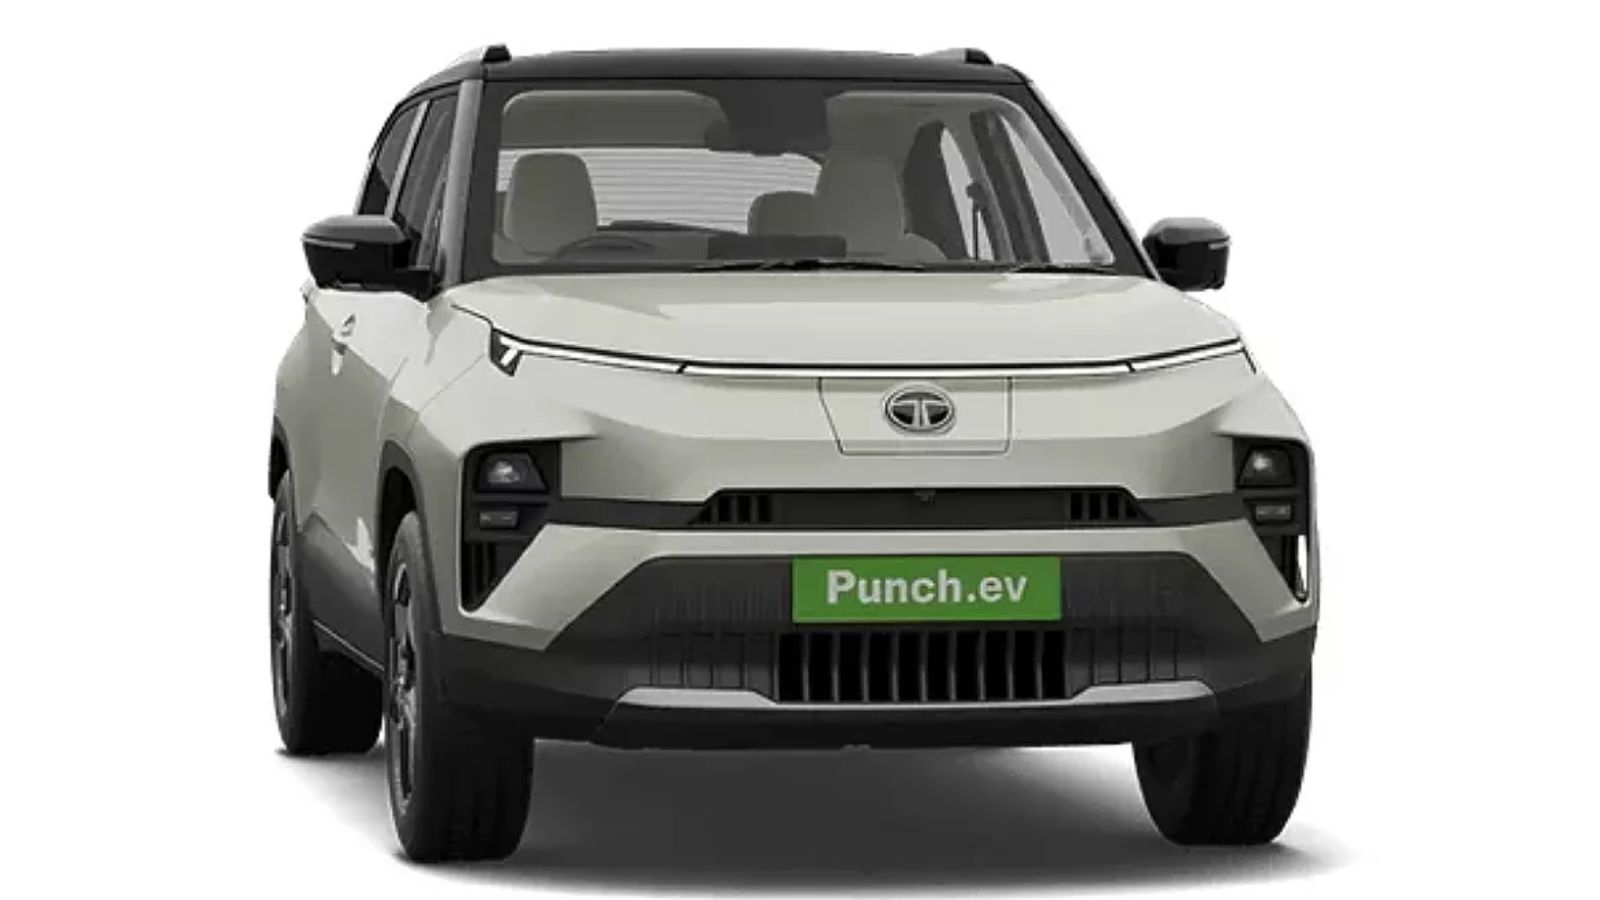 Tata Punch EV: A Feature-Packed Electric SUV for Urban Commutes